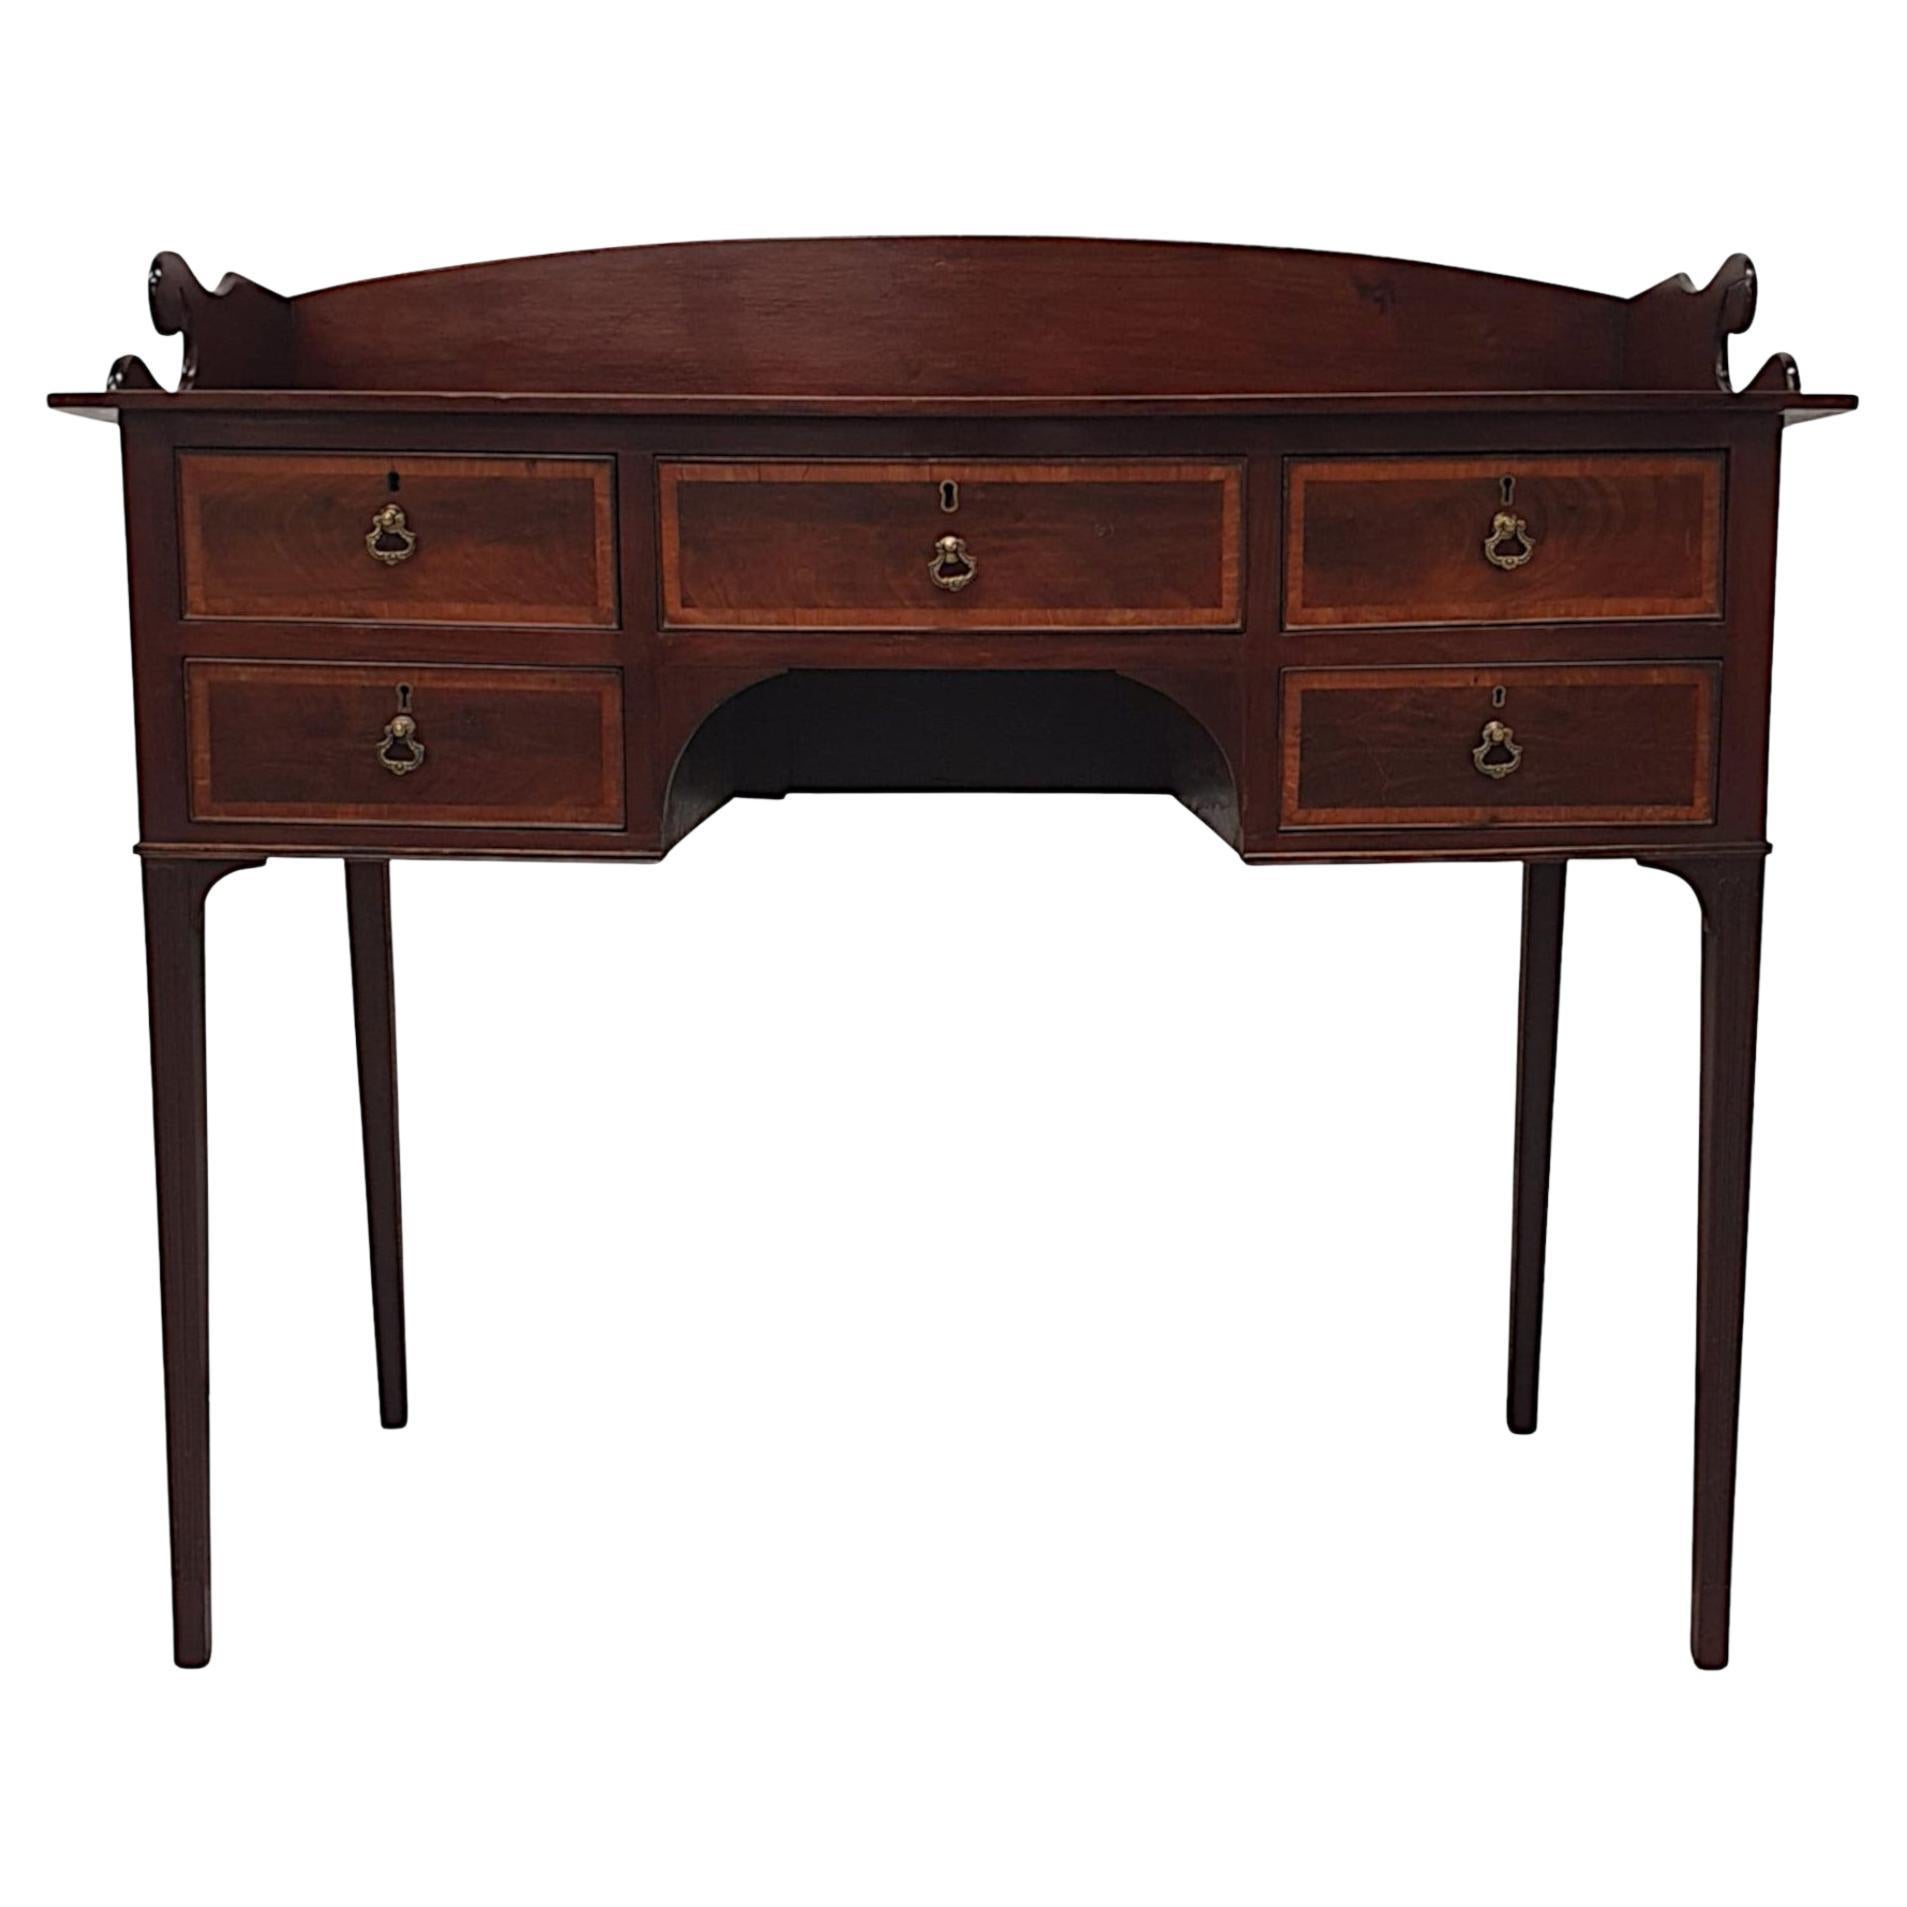 A Fine 19th Century Inlaid Mahogany Sideboard or Hall Table For Sale